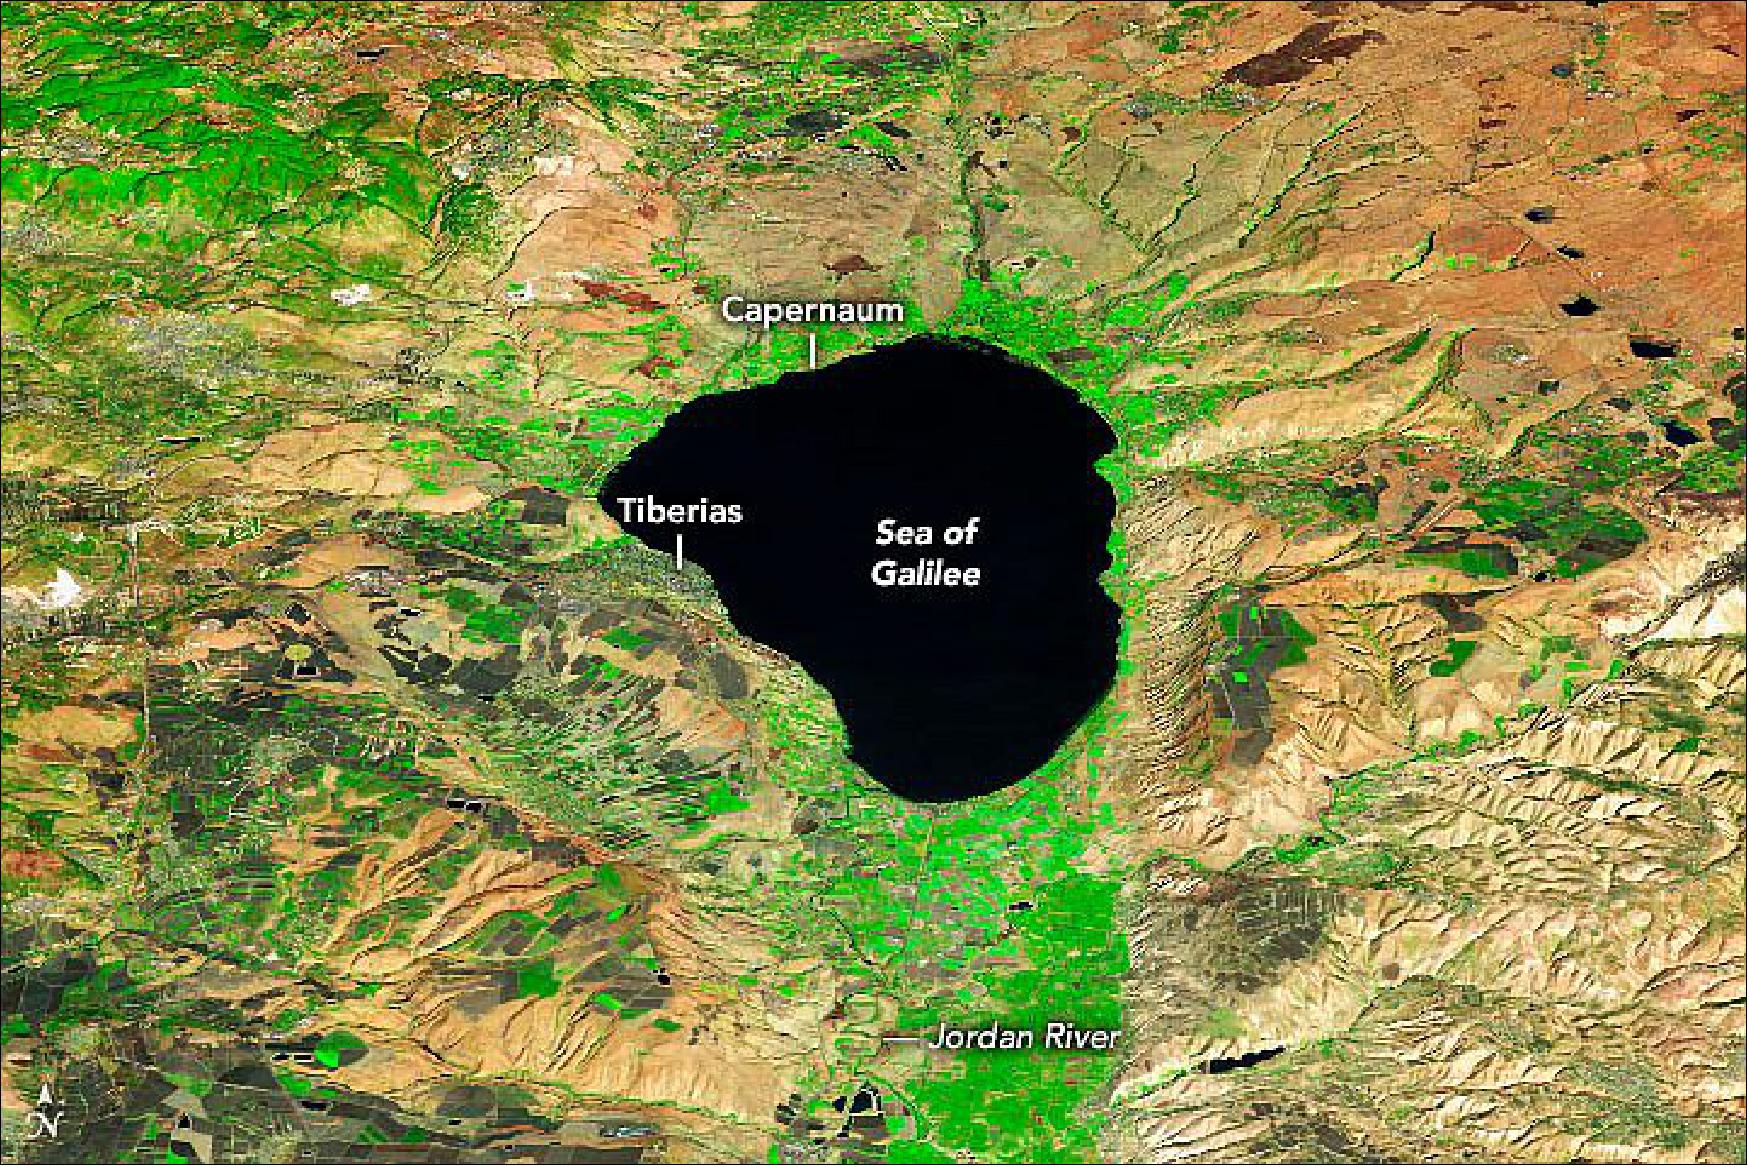 Figure 6: The OLI instrument on Landsat-8 captured this false-color image (bands 6-5-4) of the lake and its surrounding landscape on October 27, 2020. The image was overlaid on a digital elevation model from the Shuttle Radar Topography Mission (SRTM) to give a sense of the topography (image credit: NASA Earth Observatory images by Joshua Stevens, using Landsat data from the U.S. Geological Survey and topographic data from the Shuttle Radar Topography Mission (SRTM). Story by Adam Voiland)